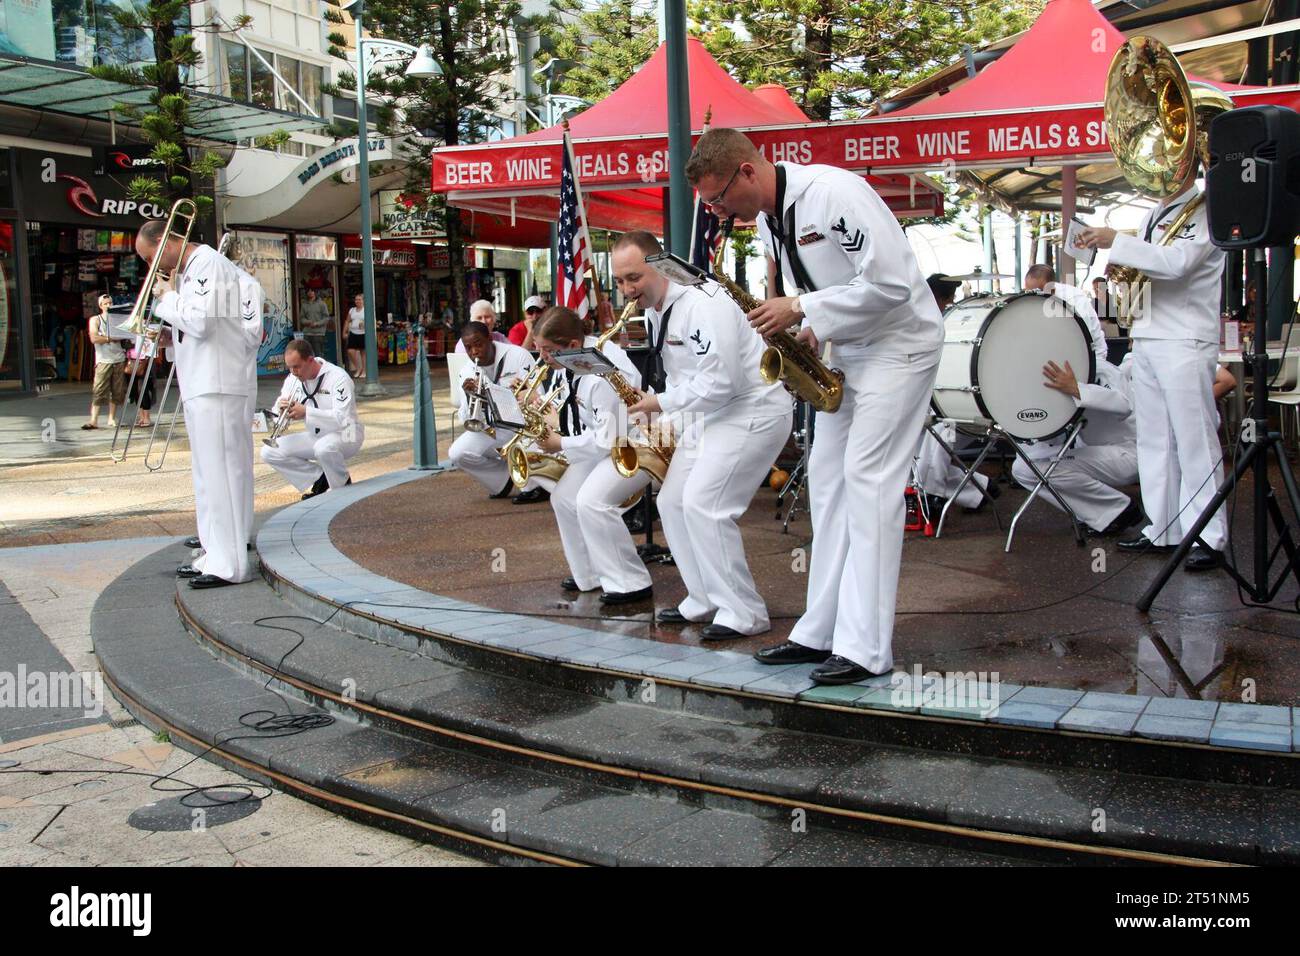 1105101X994-002 GOLD COAST, Australia (May 10, 2011) Members of the U.S. 7th Fleet Band perform at an outdoor shopping center in Gold Coast, Australia. The band is in Australia to commemorate the 69th anniversary of the Battle of the Coral Sea and to share music with the community in the wake of recent floods. (U.S. Navy Stock Photo